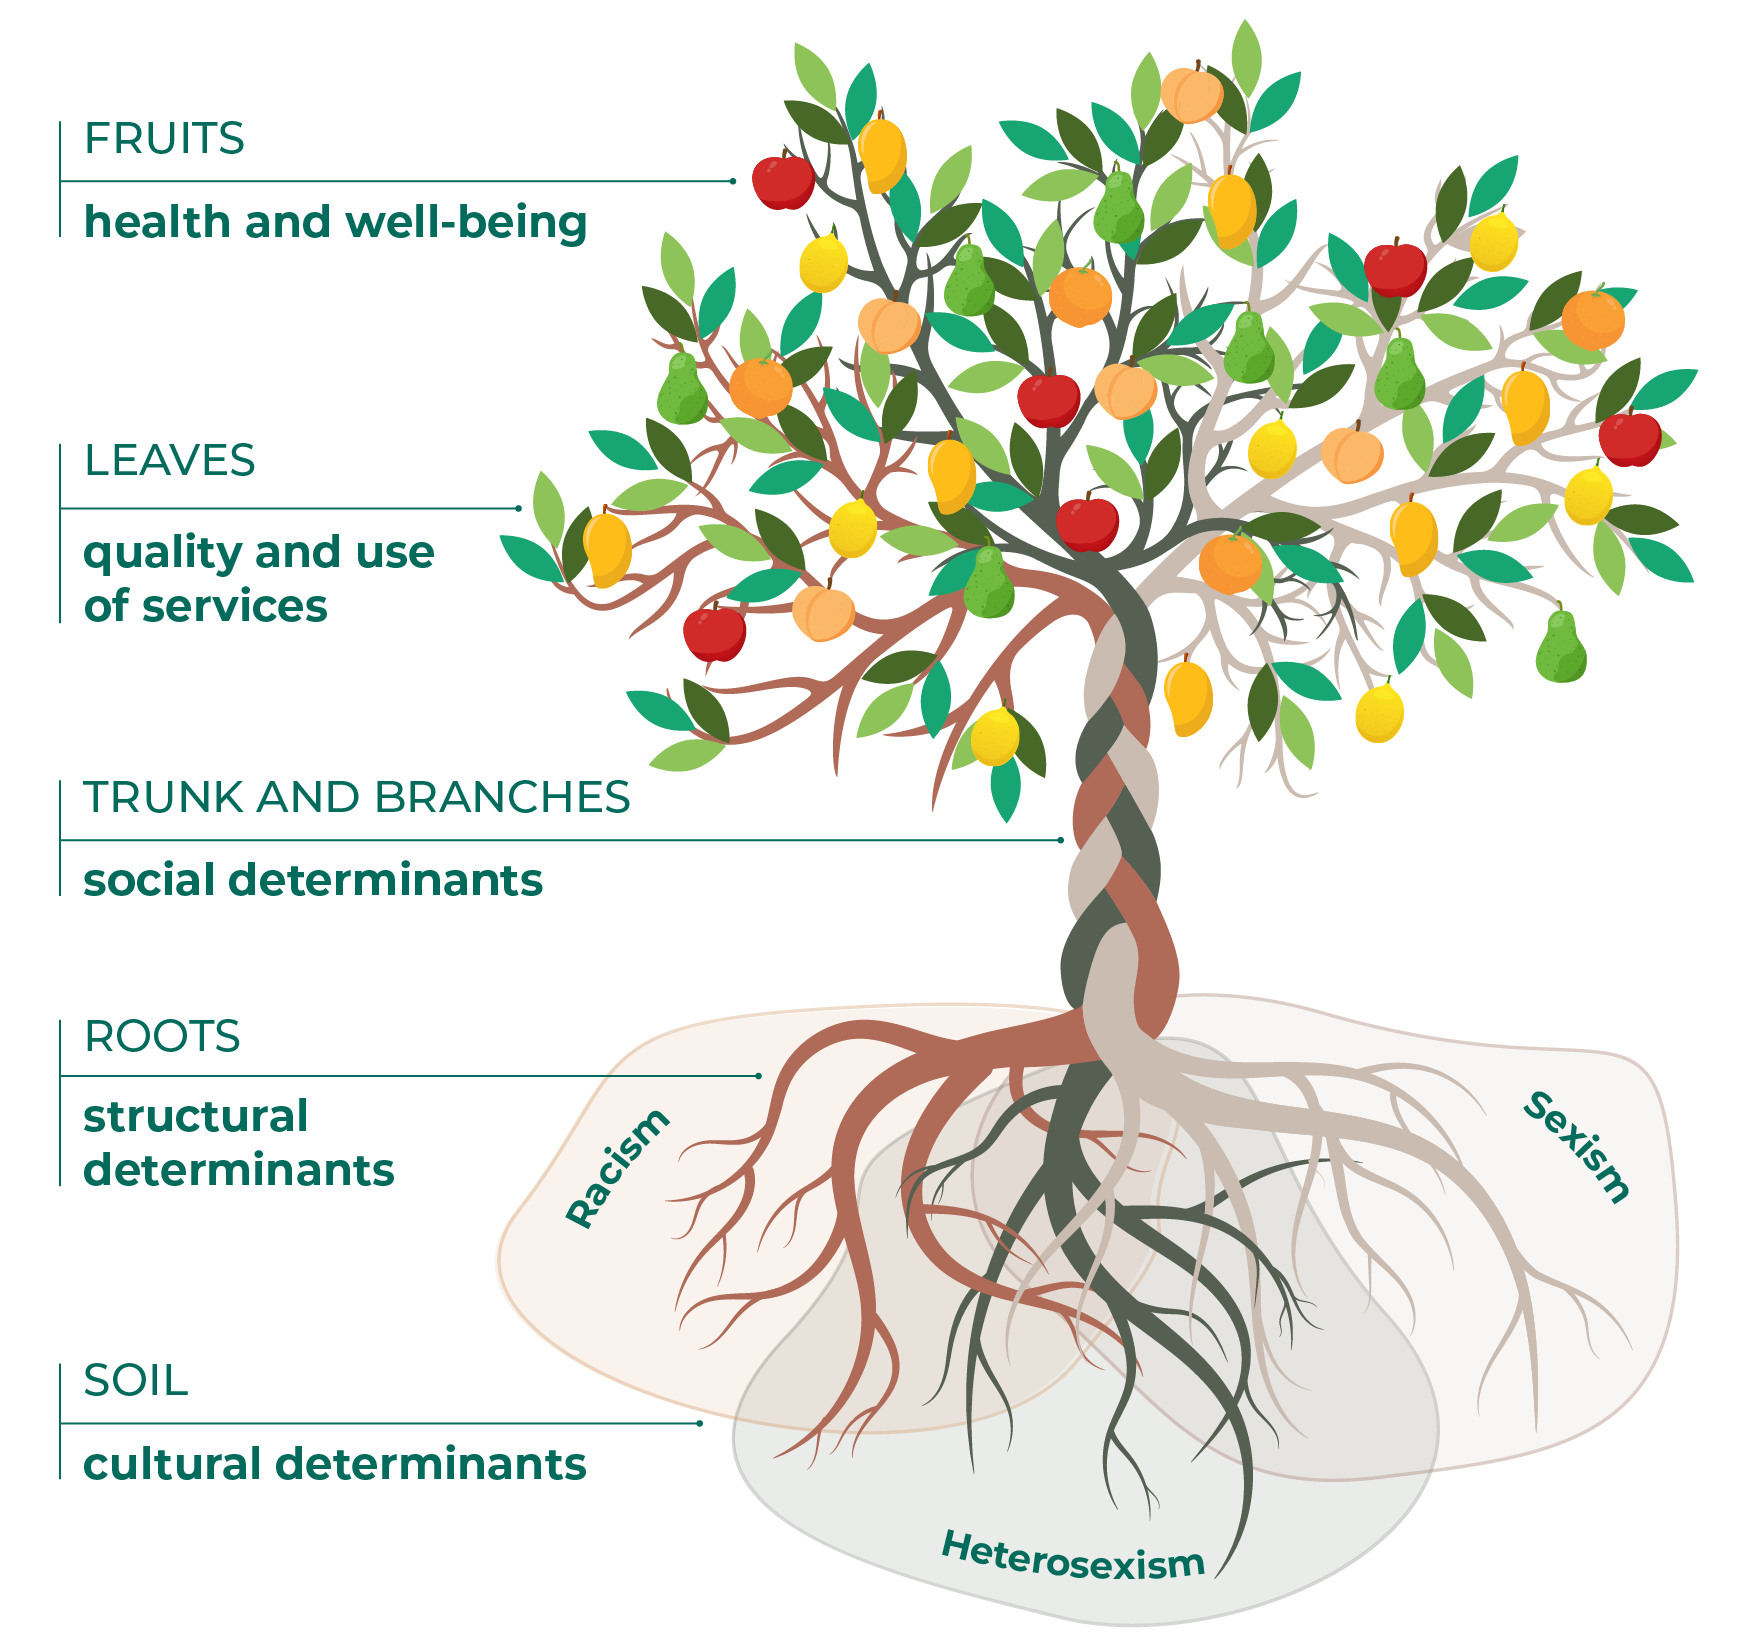 A tree grows out of the soil to produce leaves and fruits. The tree has three distinct colors of roots, which are braided together to form the trunk and branches. The soil is labeled "cultural determinants" and includes racism, heterosexism, and sexism. Each other level of the tree corresponds to a level of health influence, from the structural determinants to health and wellbeing in the fruits.